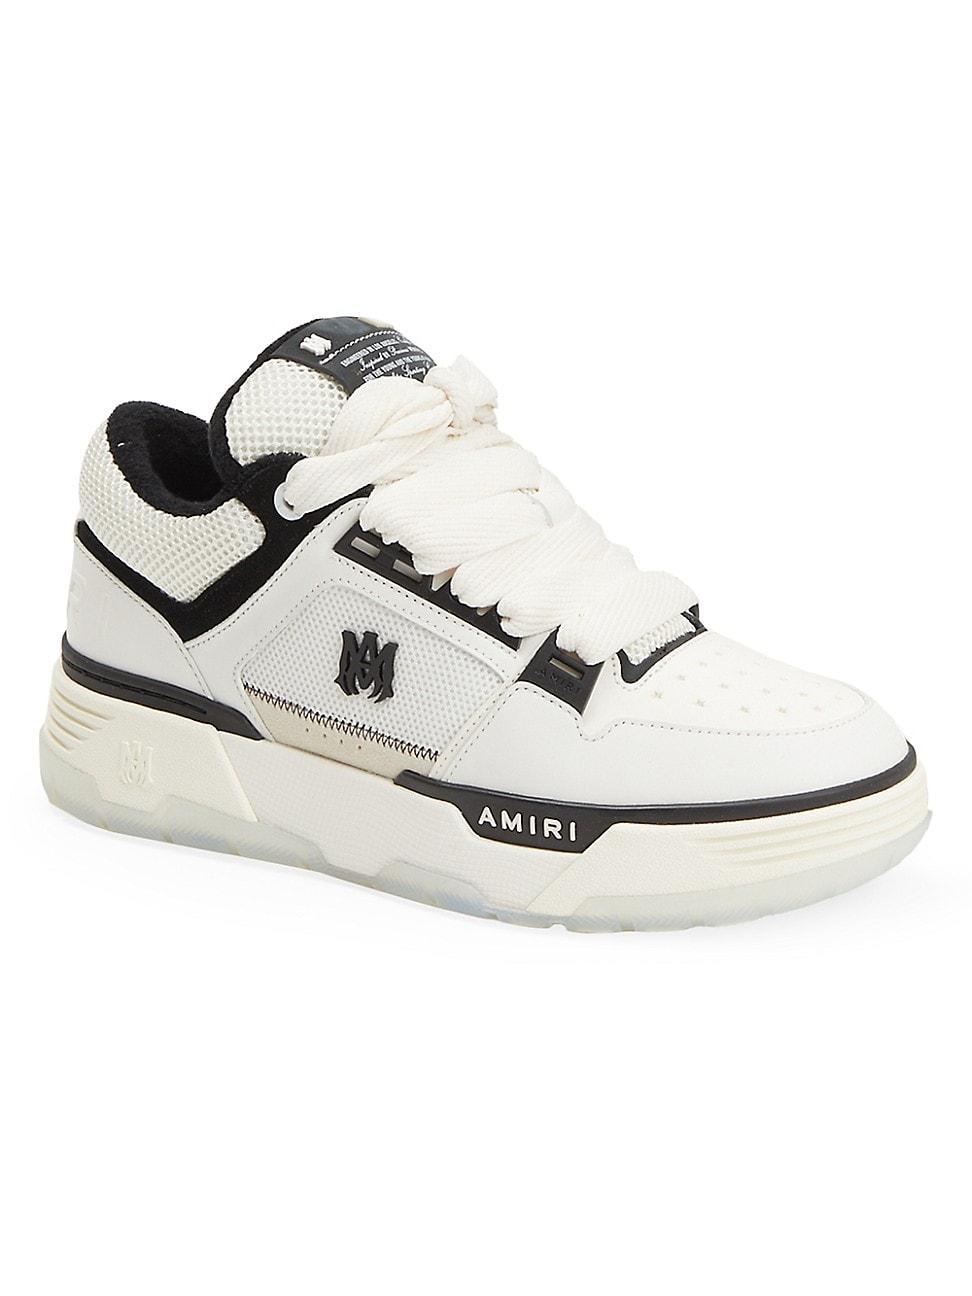 Mens MA-1 Leather & Mesh Low-Top Sneakers Product Image